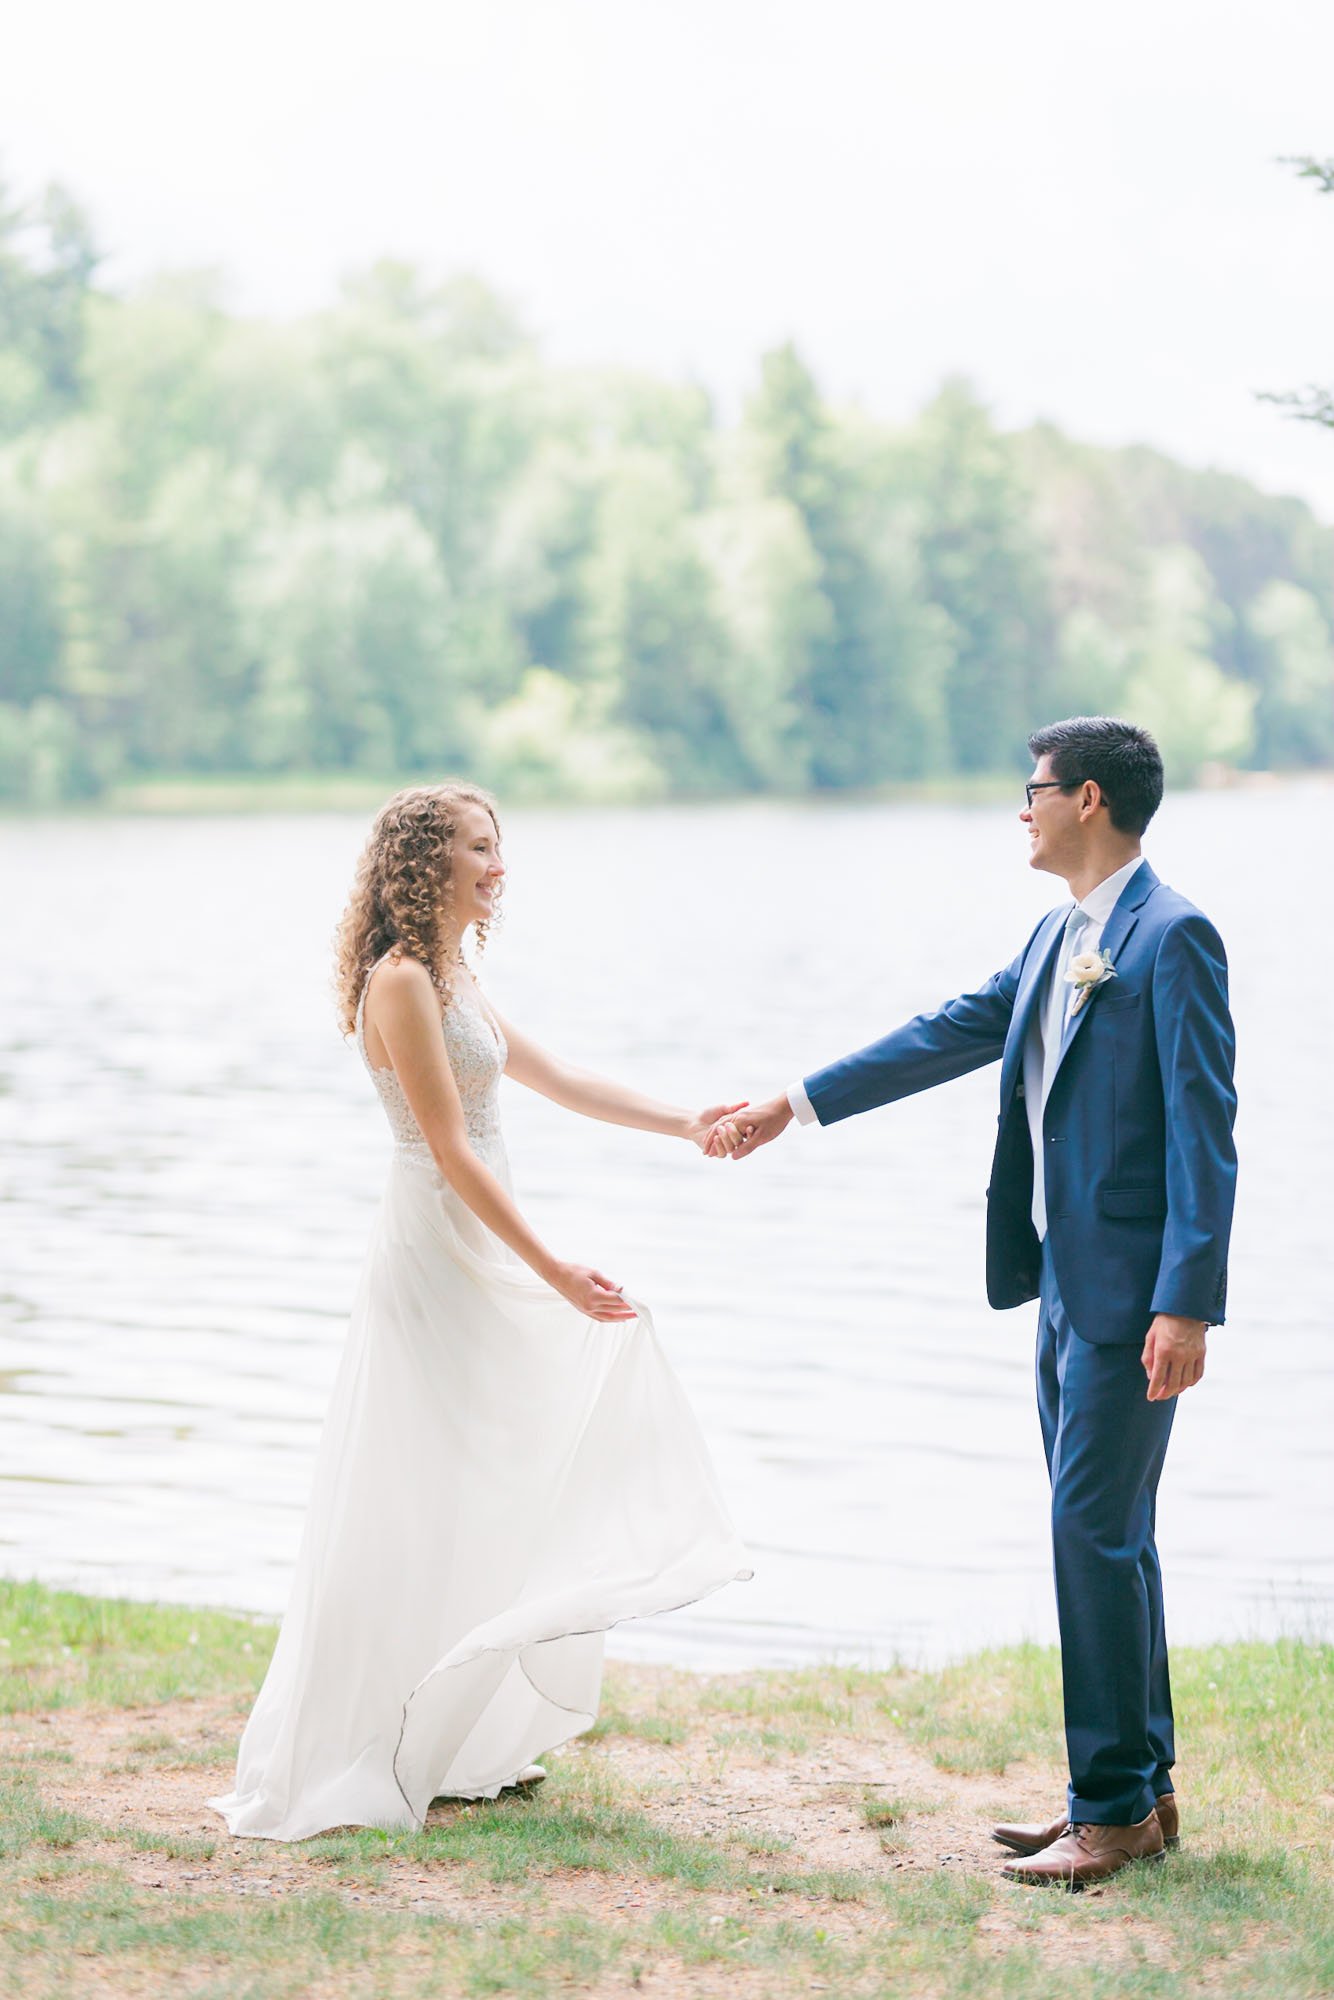 jessica-kovach-photography-lakeside-wisconsin-small-and-intimate-wedding-elopement-with-friends-and-family-184.jpg